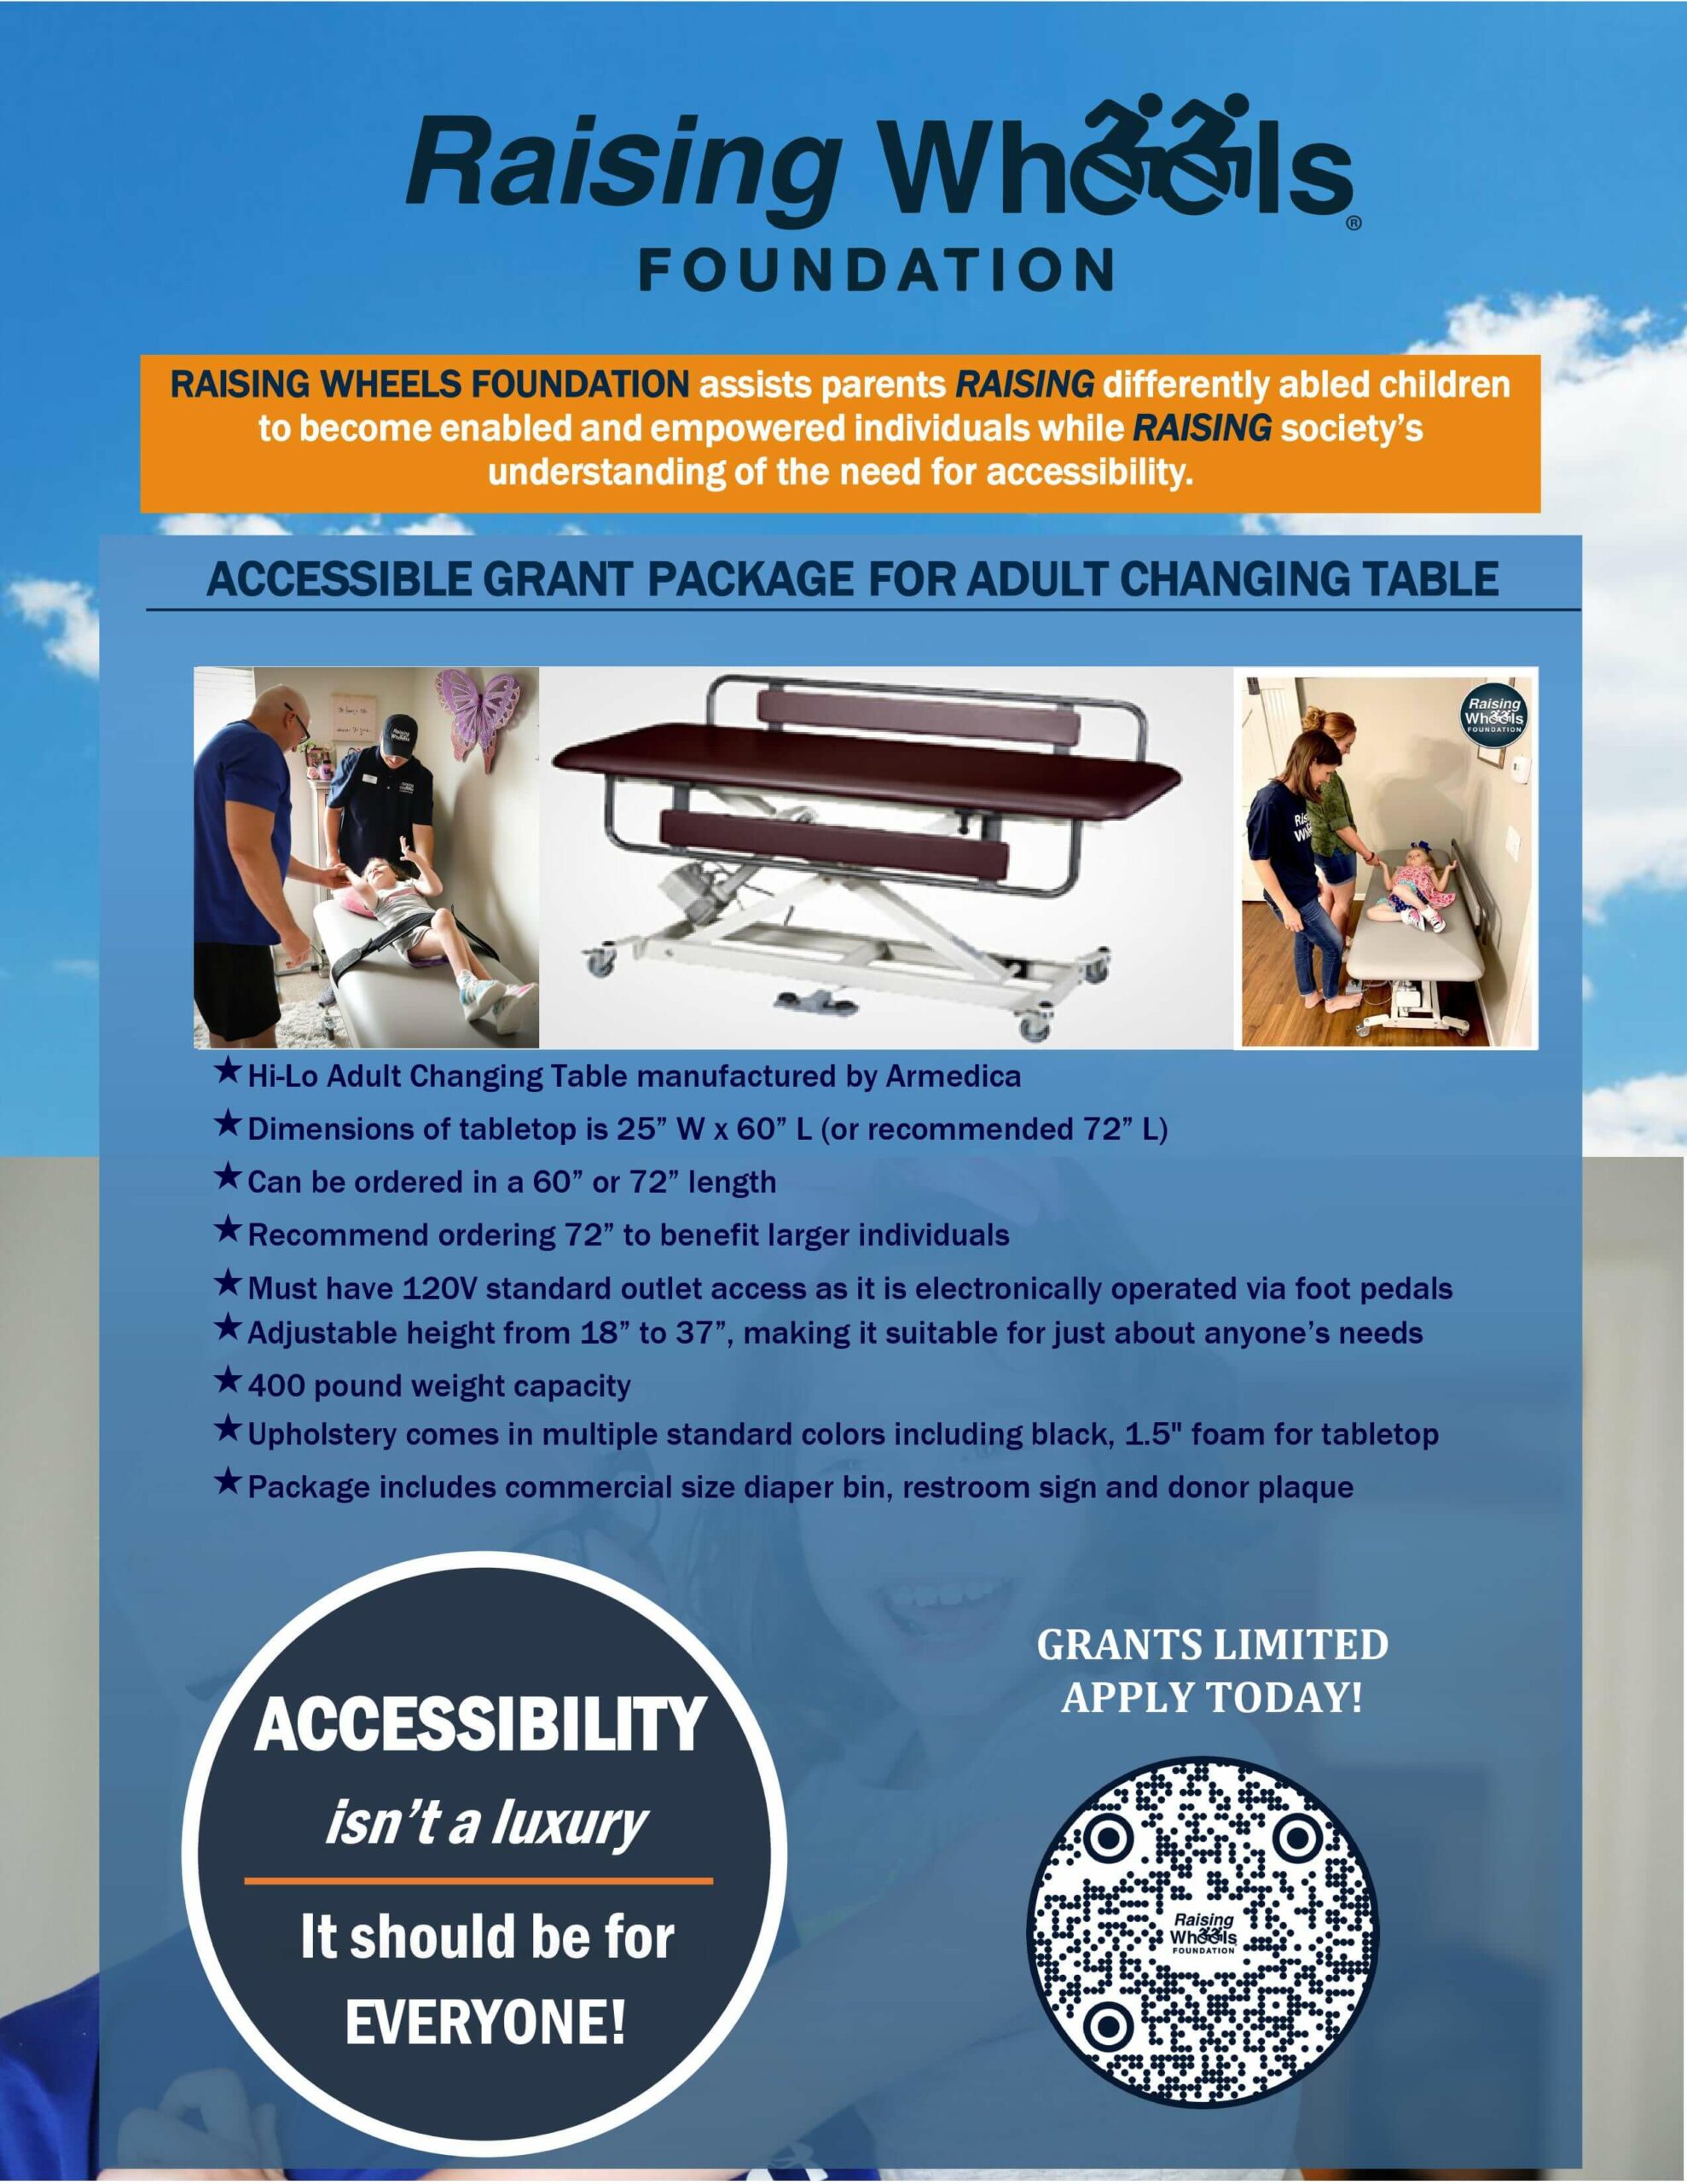 Accessible Grant Package for Adult Changing Table